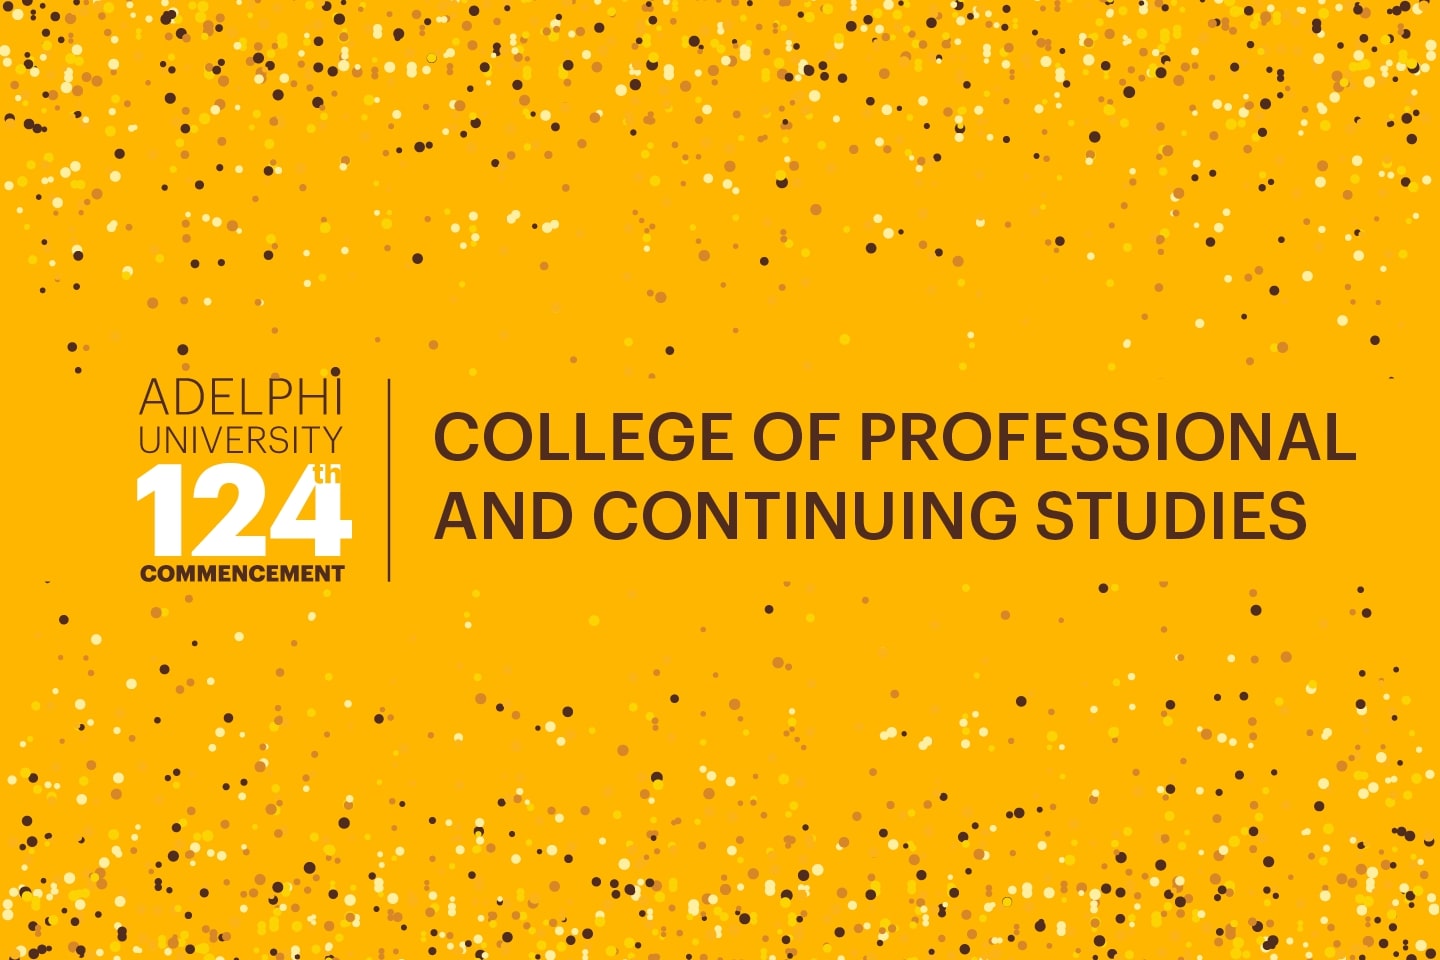 Adelphi University 124th Commencement: College of Professional and Continuing Studies